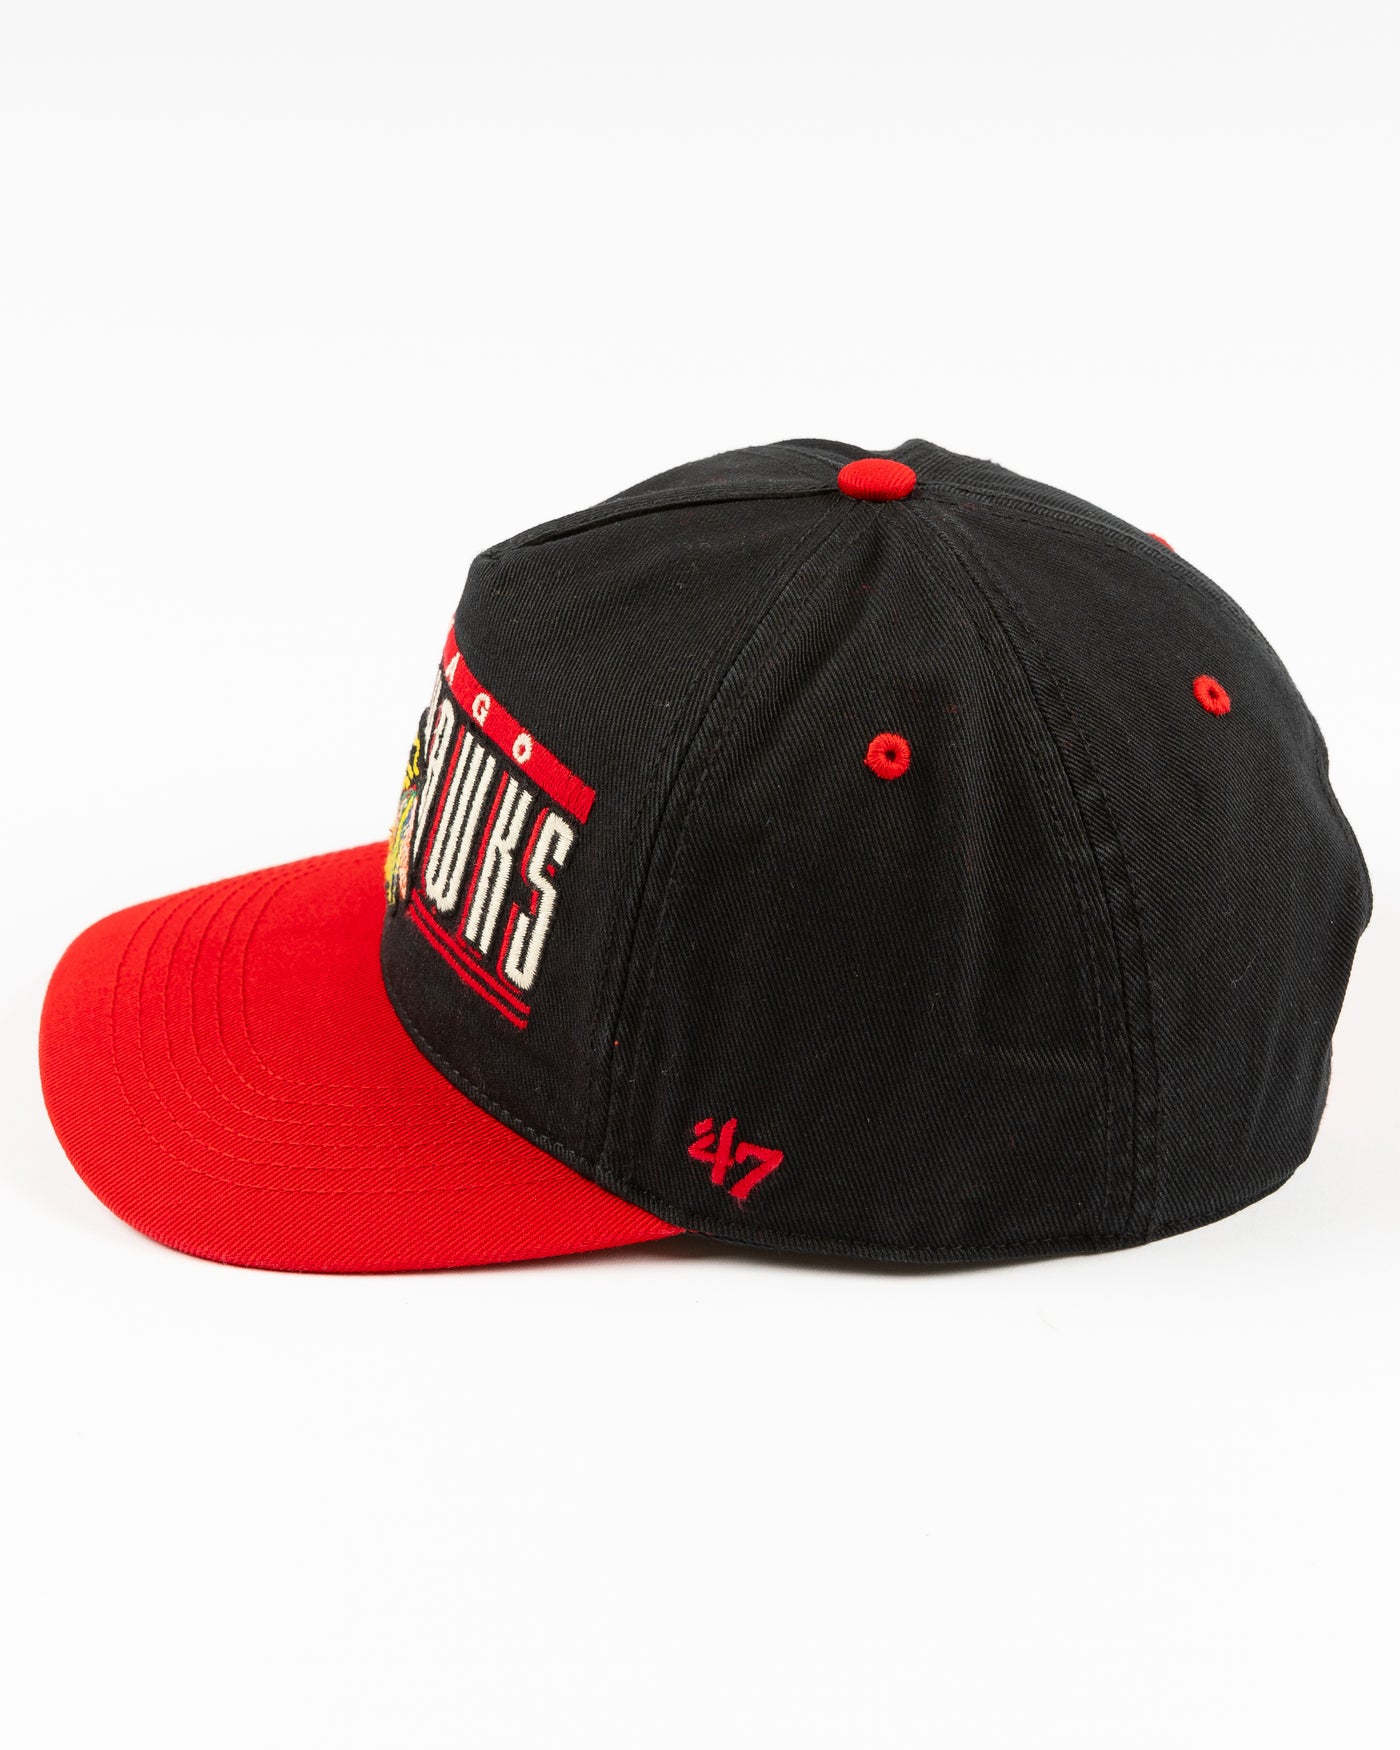 black and red '47 brand snapback hat with Chicago Blackhawks wordmark and primary logo embroidered on the front - left side lay flat